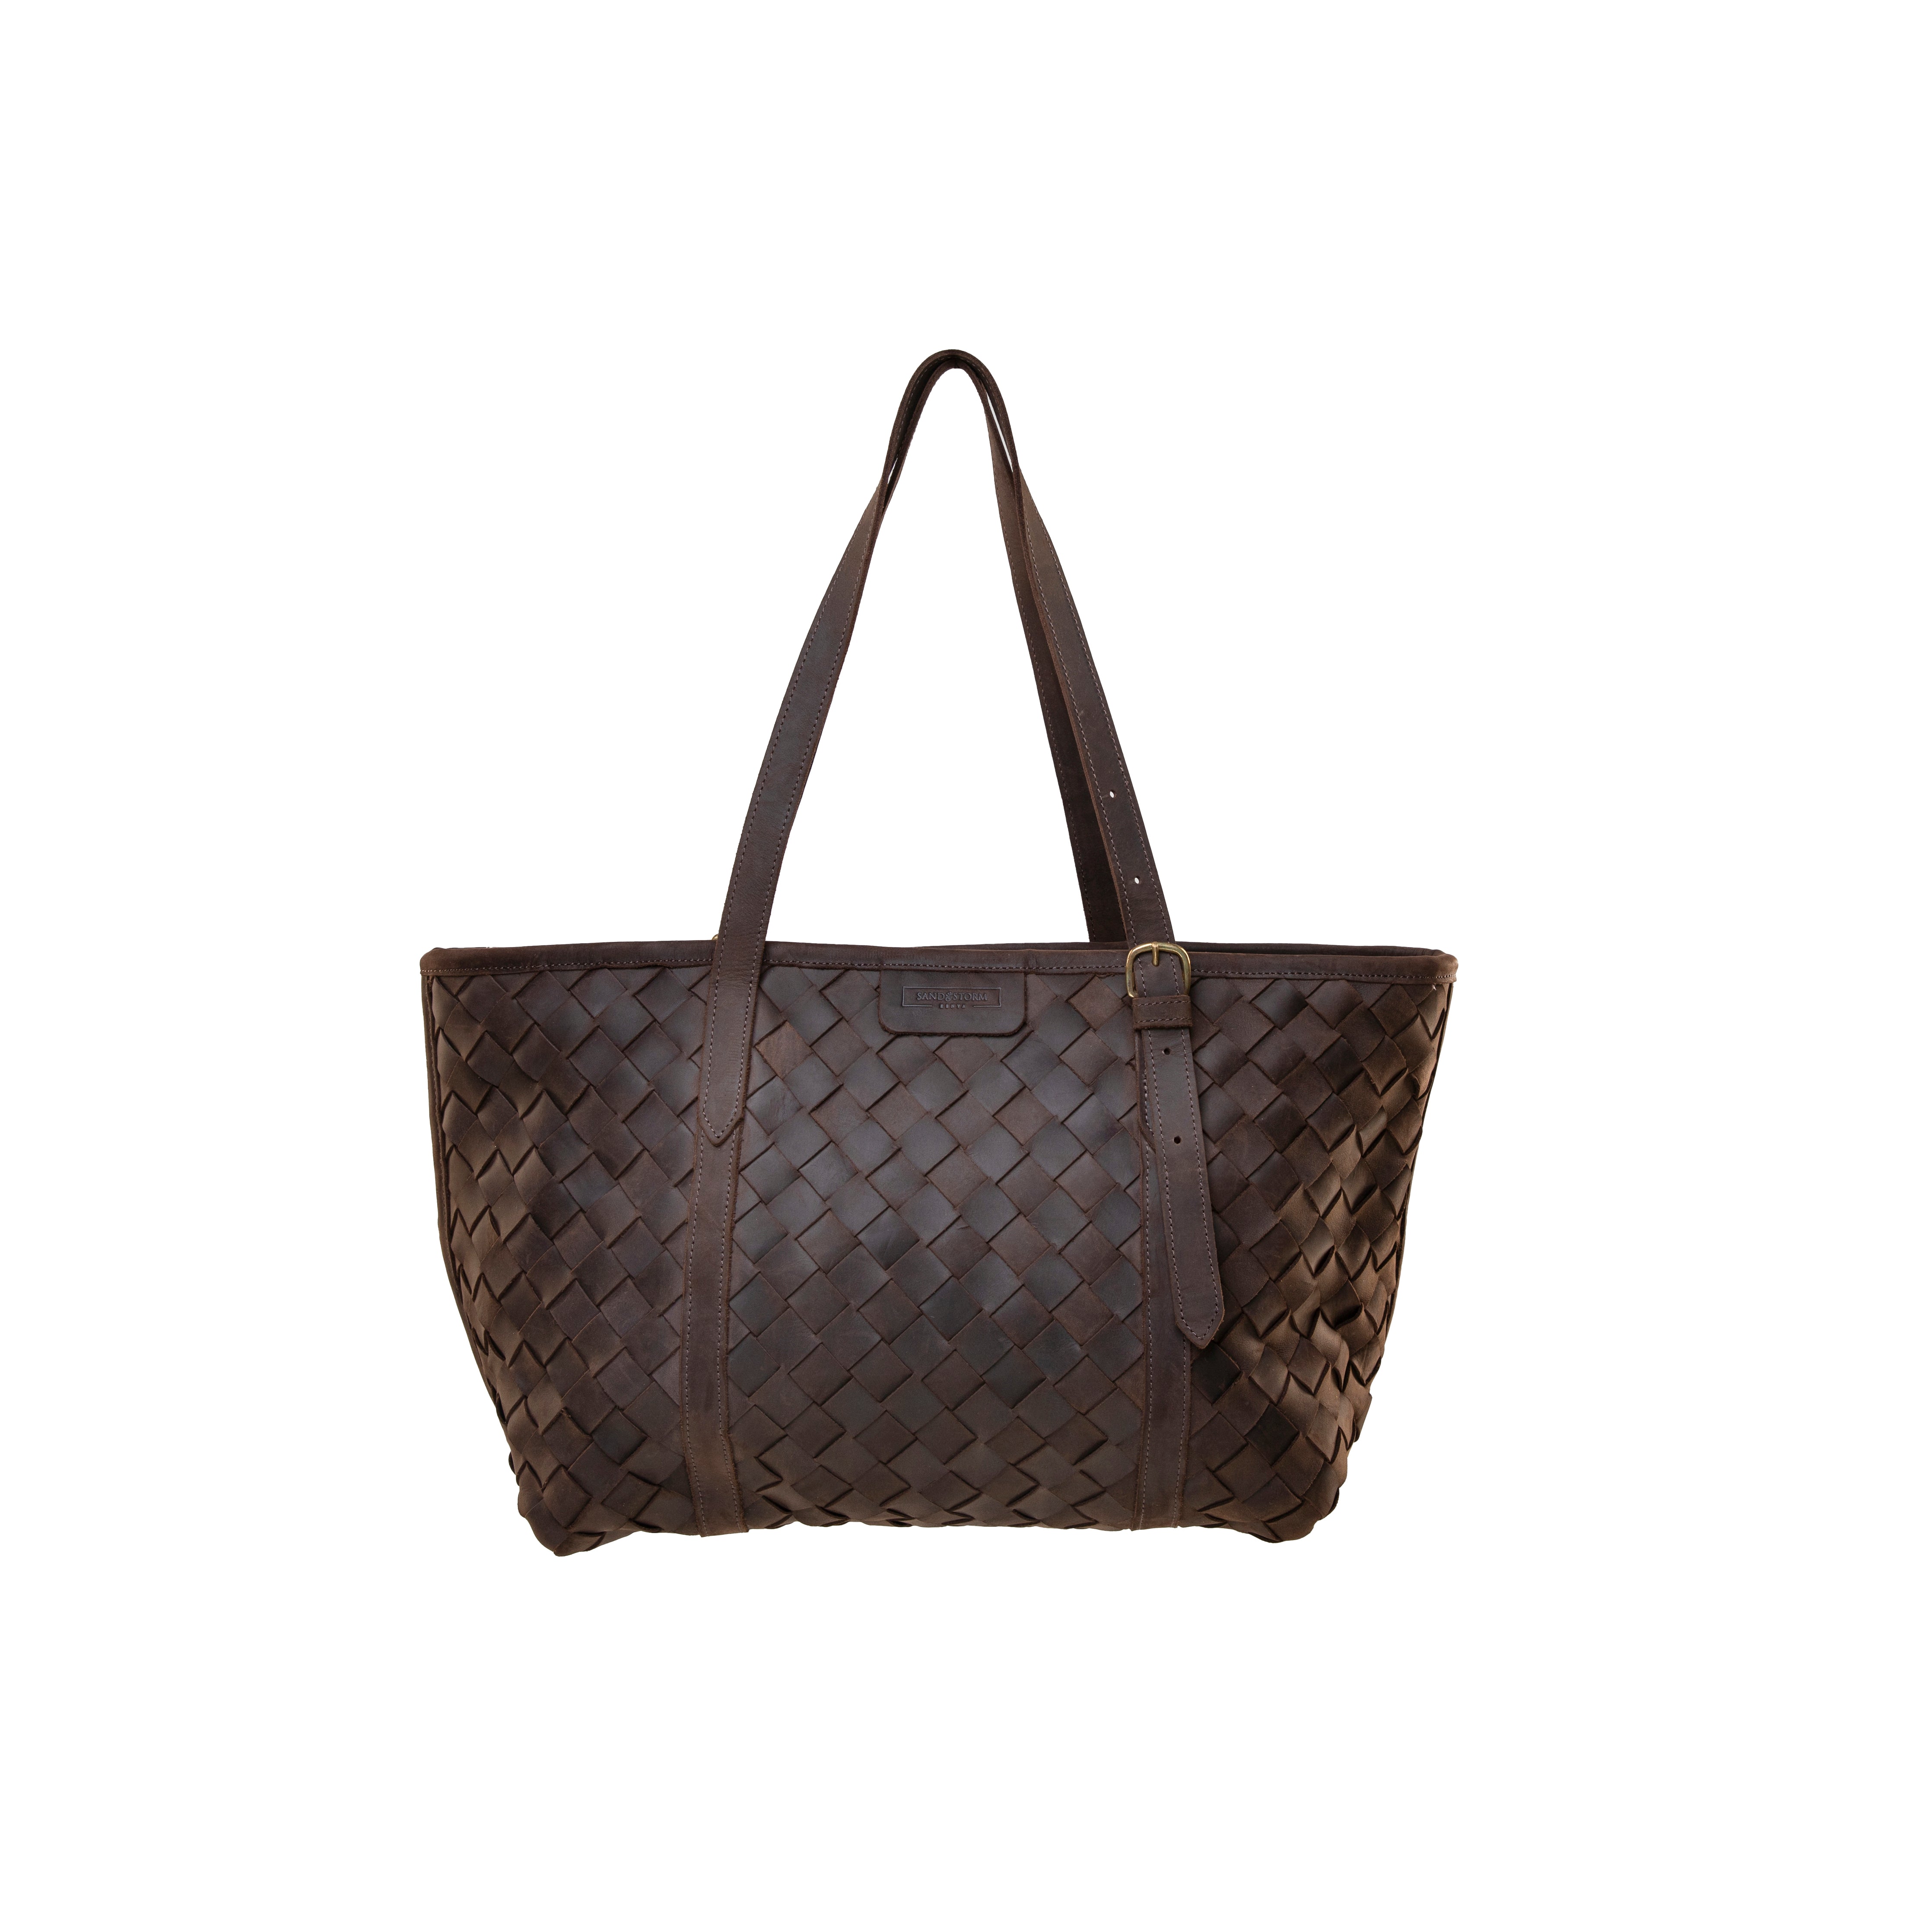 Pull-up Leather Woven Tote